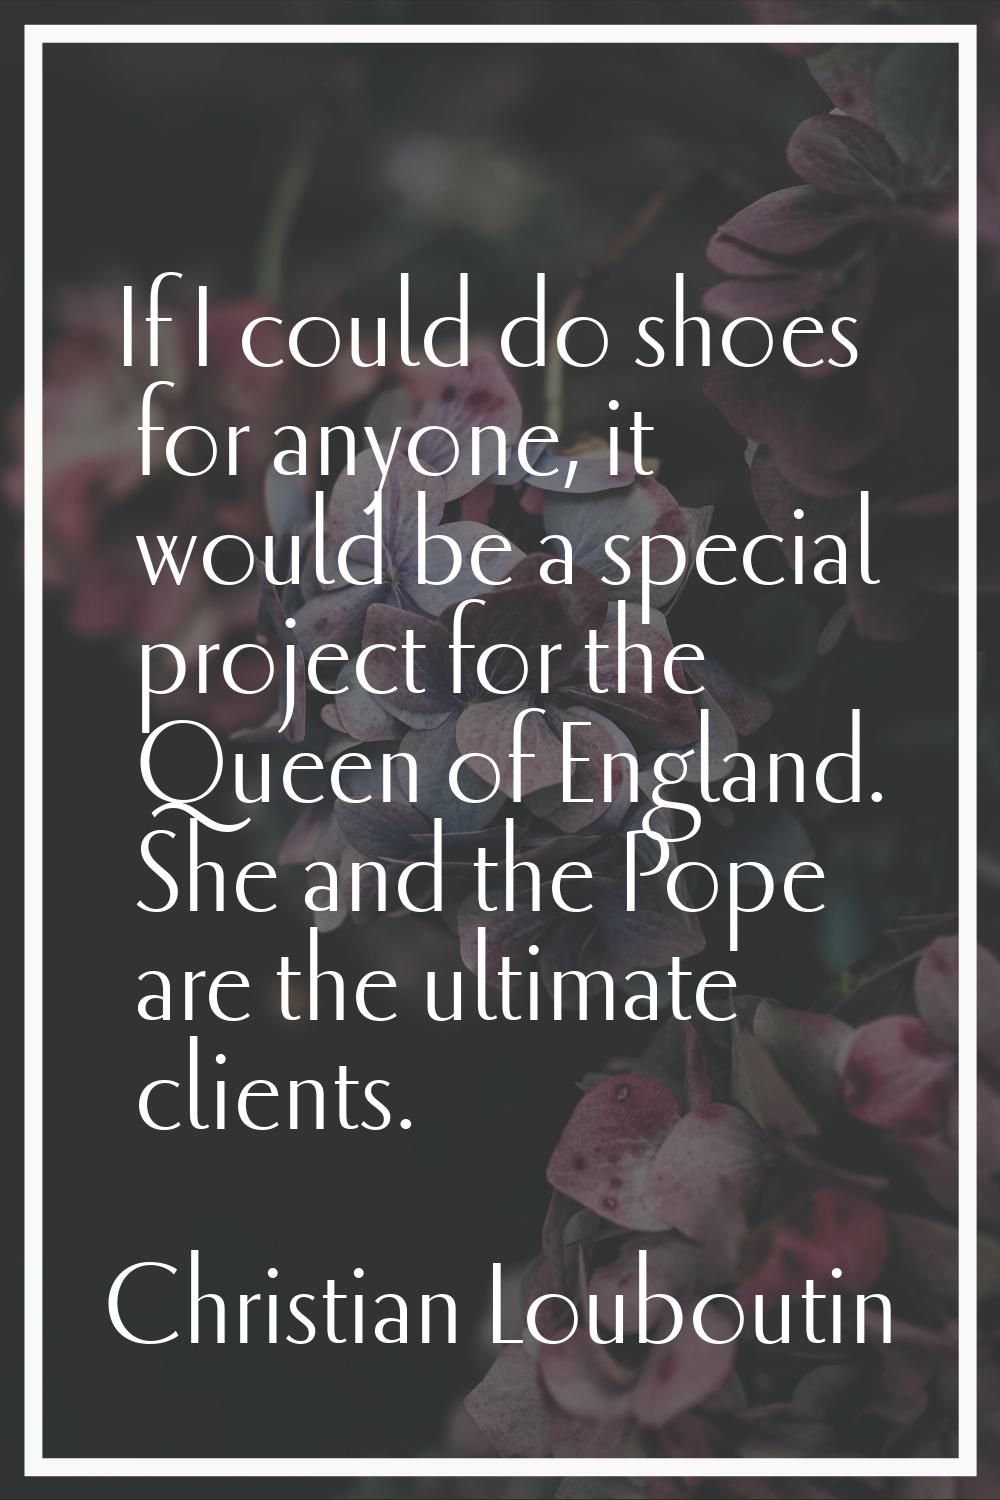 If I could do shoes for anyone, it would be a special project for the Queen of England. She and the